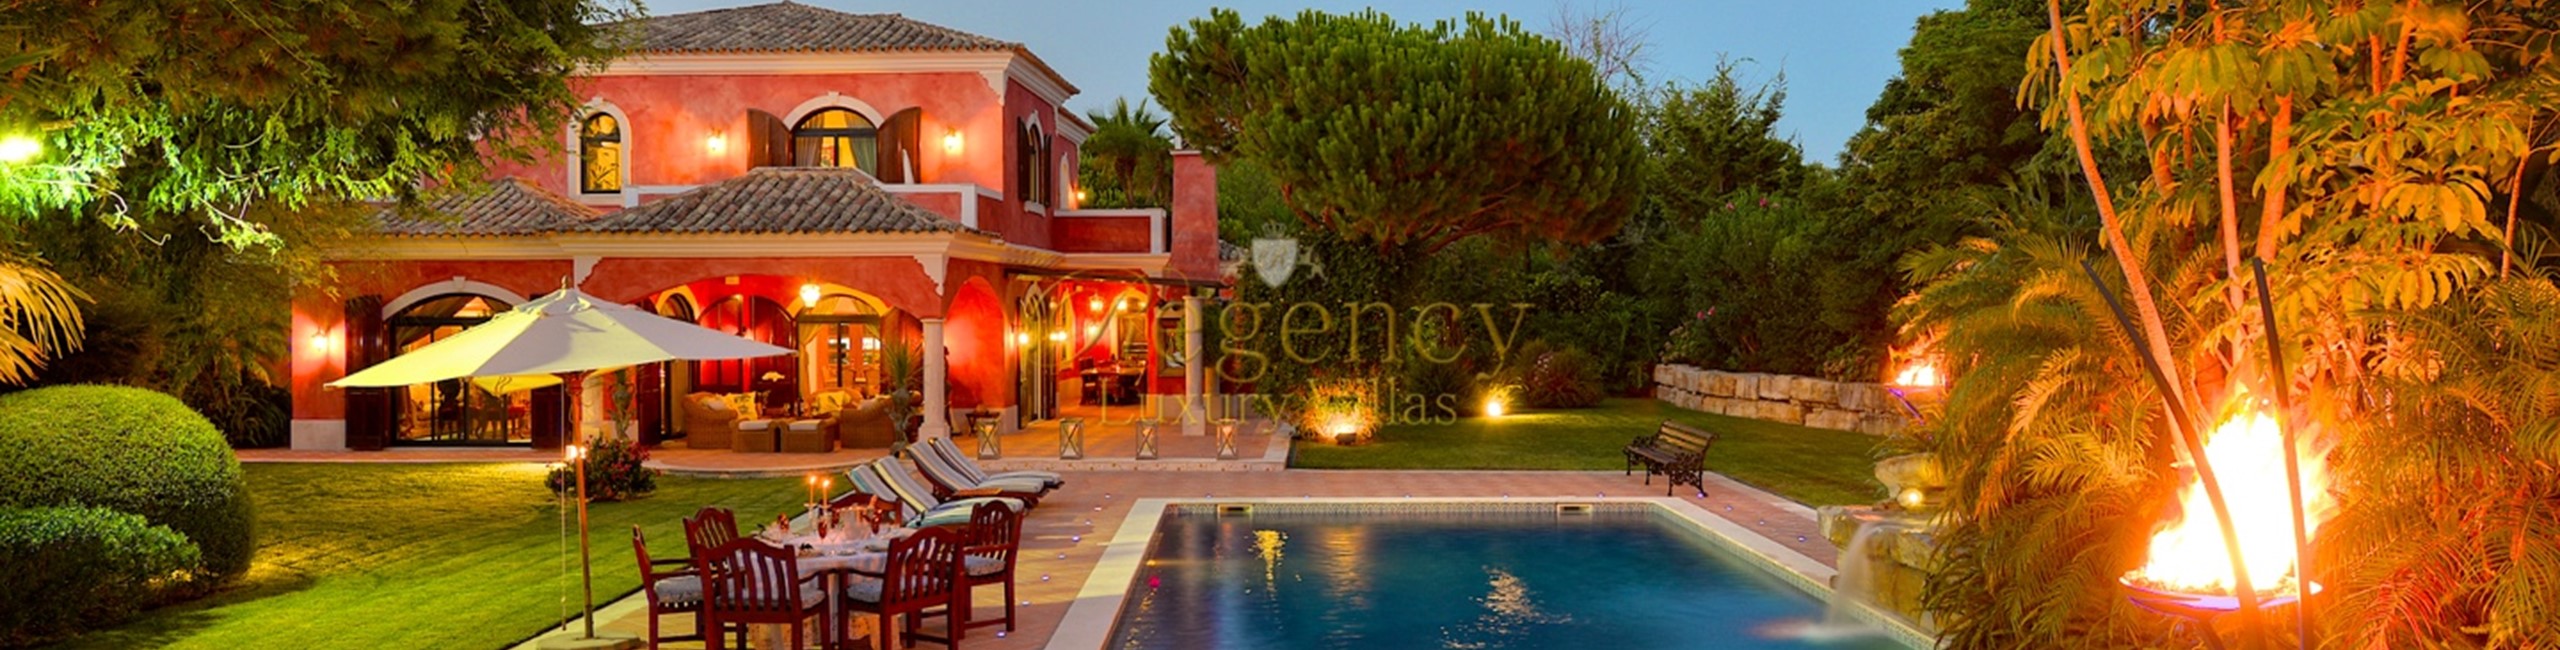 Holiday Villa To Rent In Quinta Do Lago